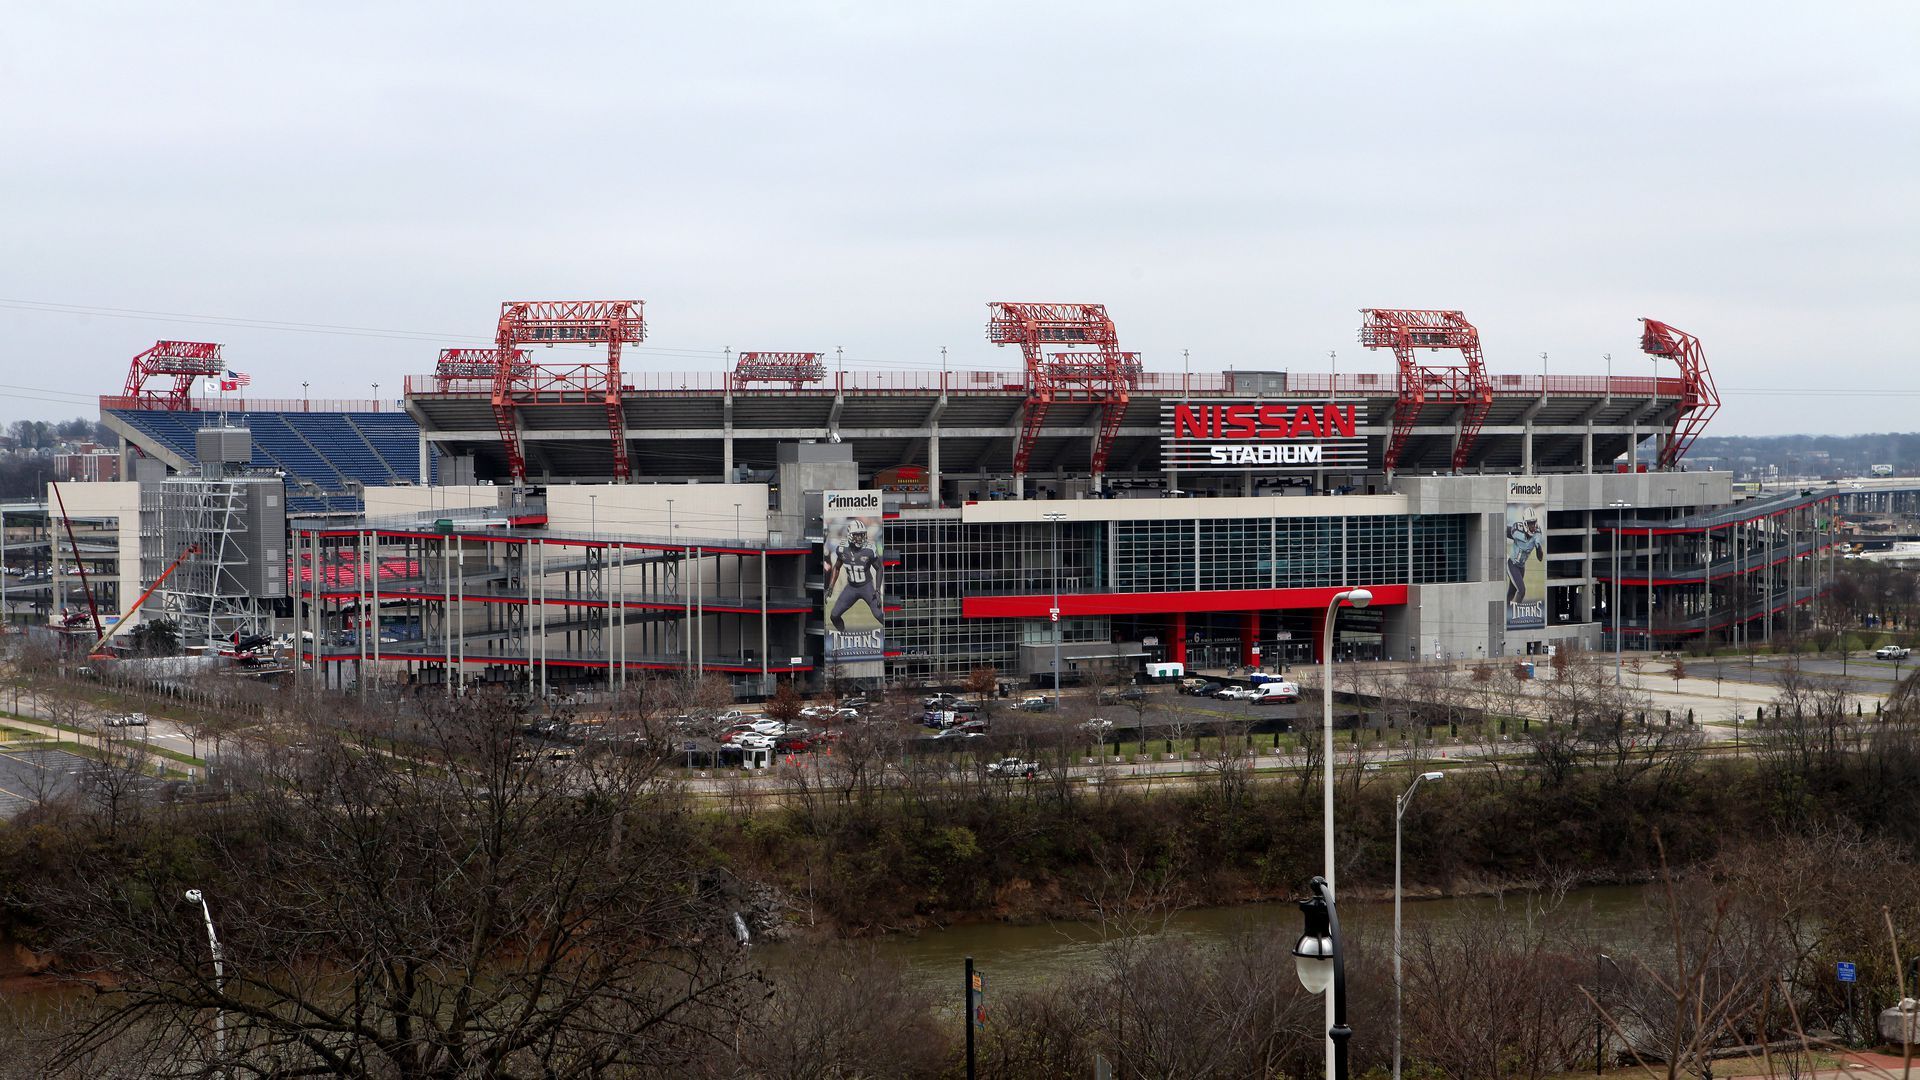 zoomed out image of Nissan Stadium in Nashville